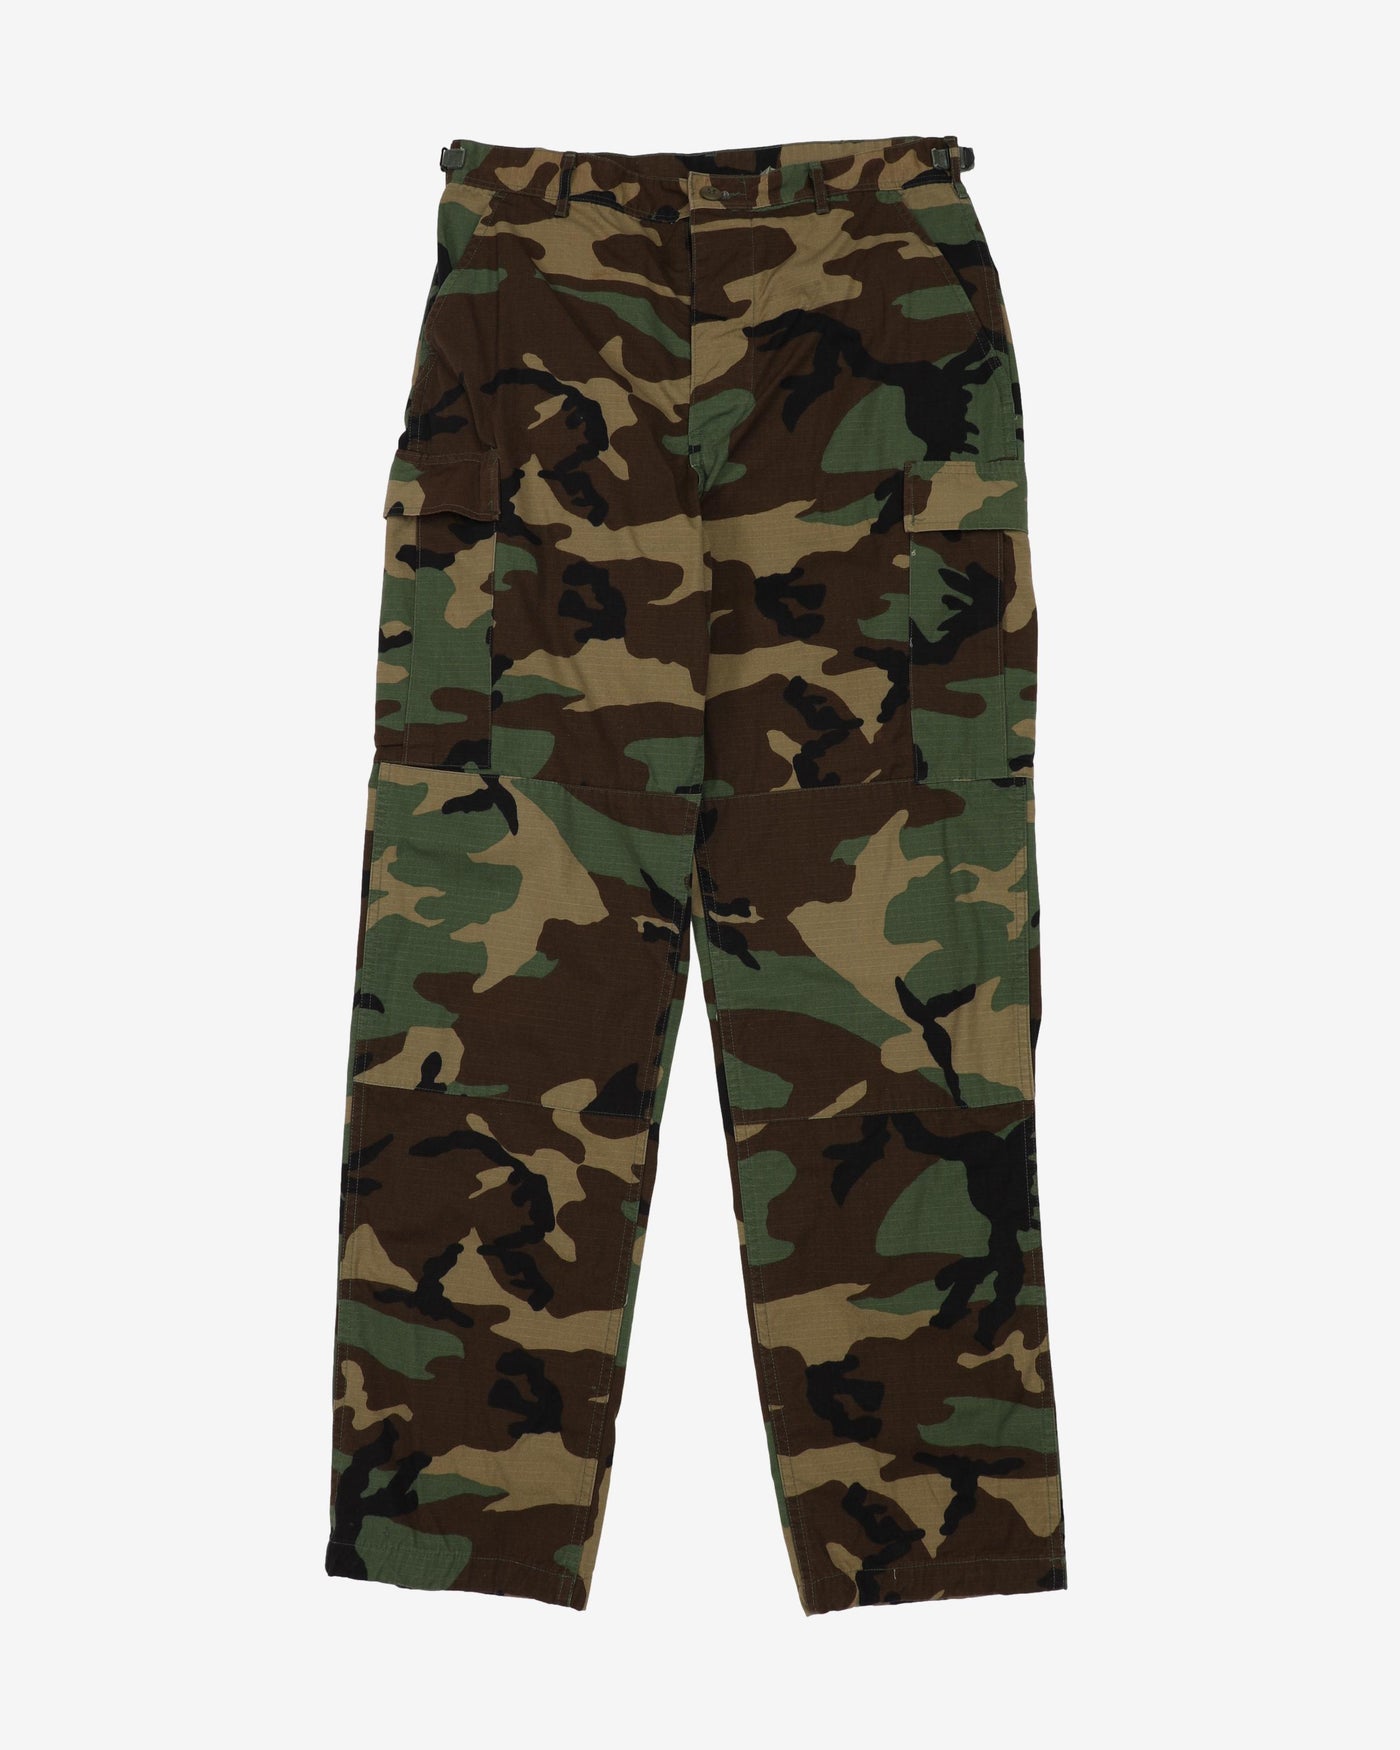 1990s Vintage US Army Woodland Camo BDU Combat Trousers - 34x35